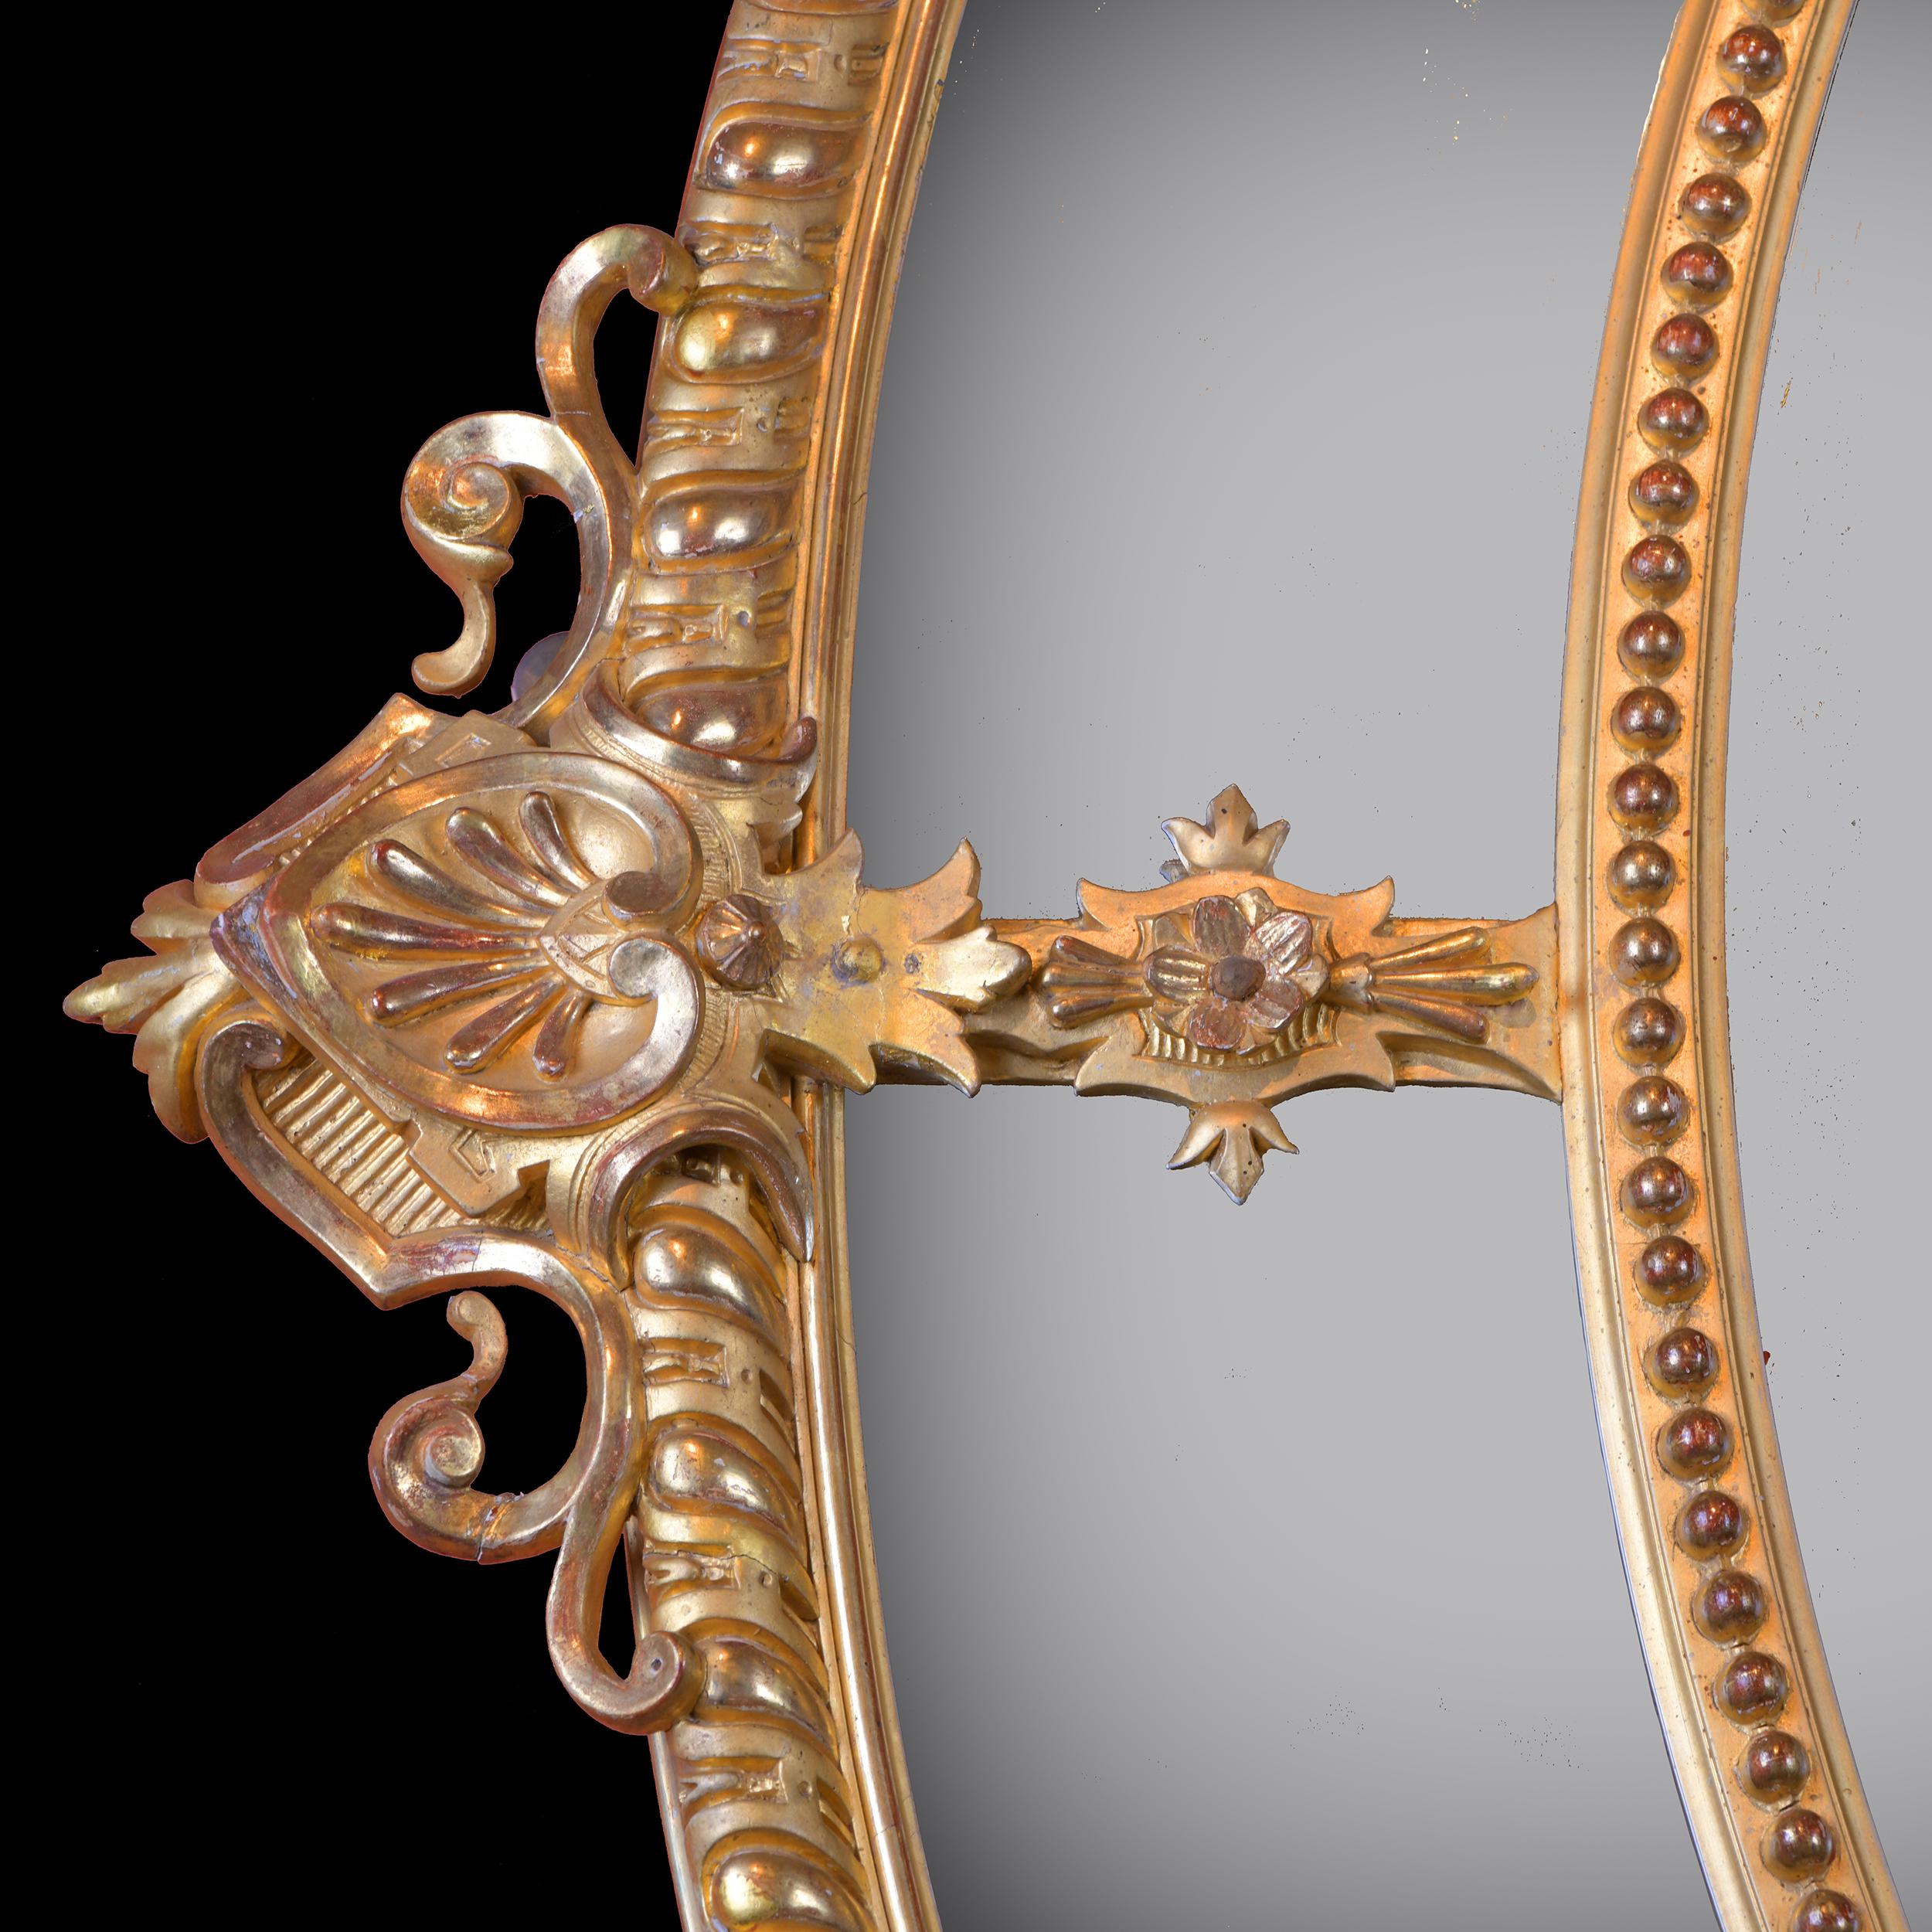 Hand-Carved 19th Century French Oval Shaped Antique Giltwood Wall Mirror